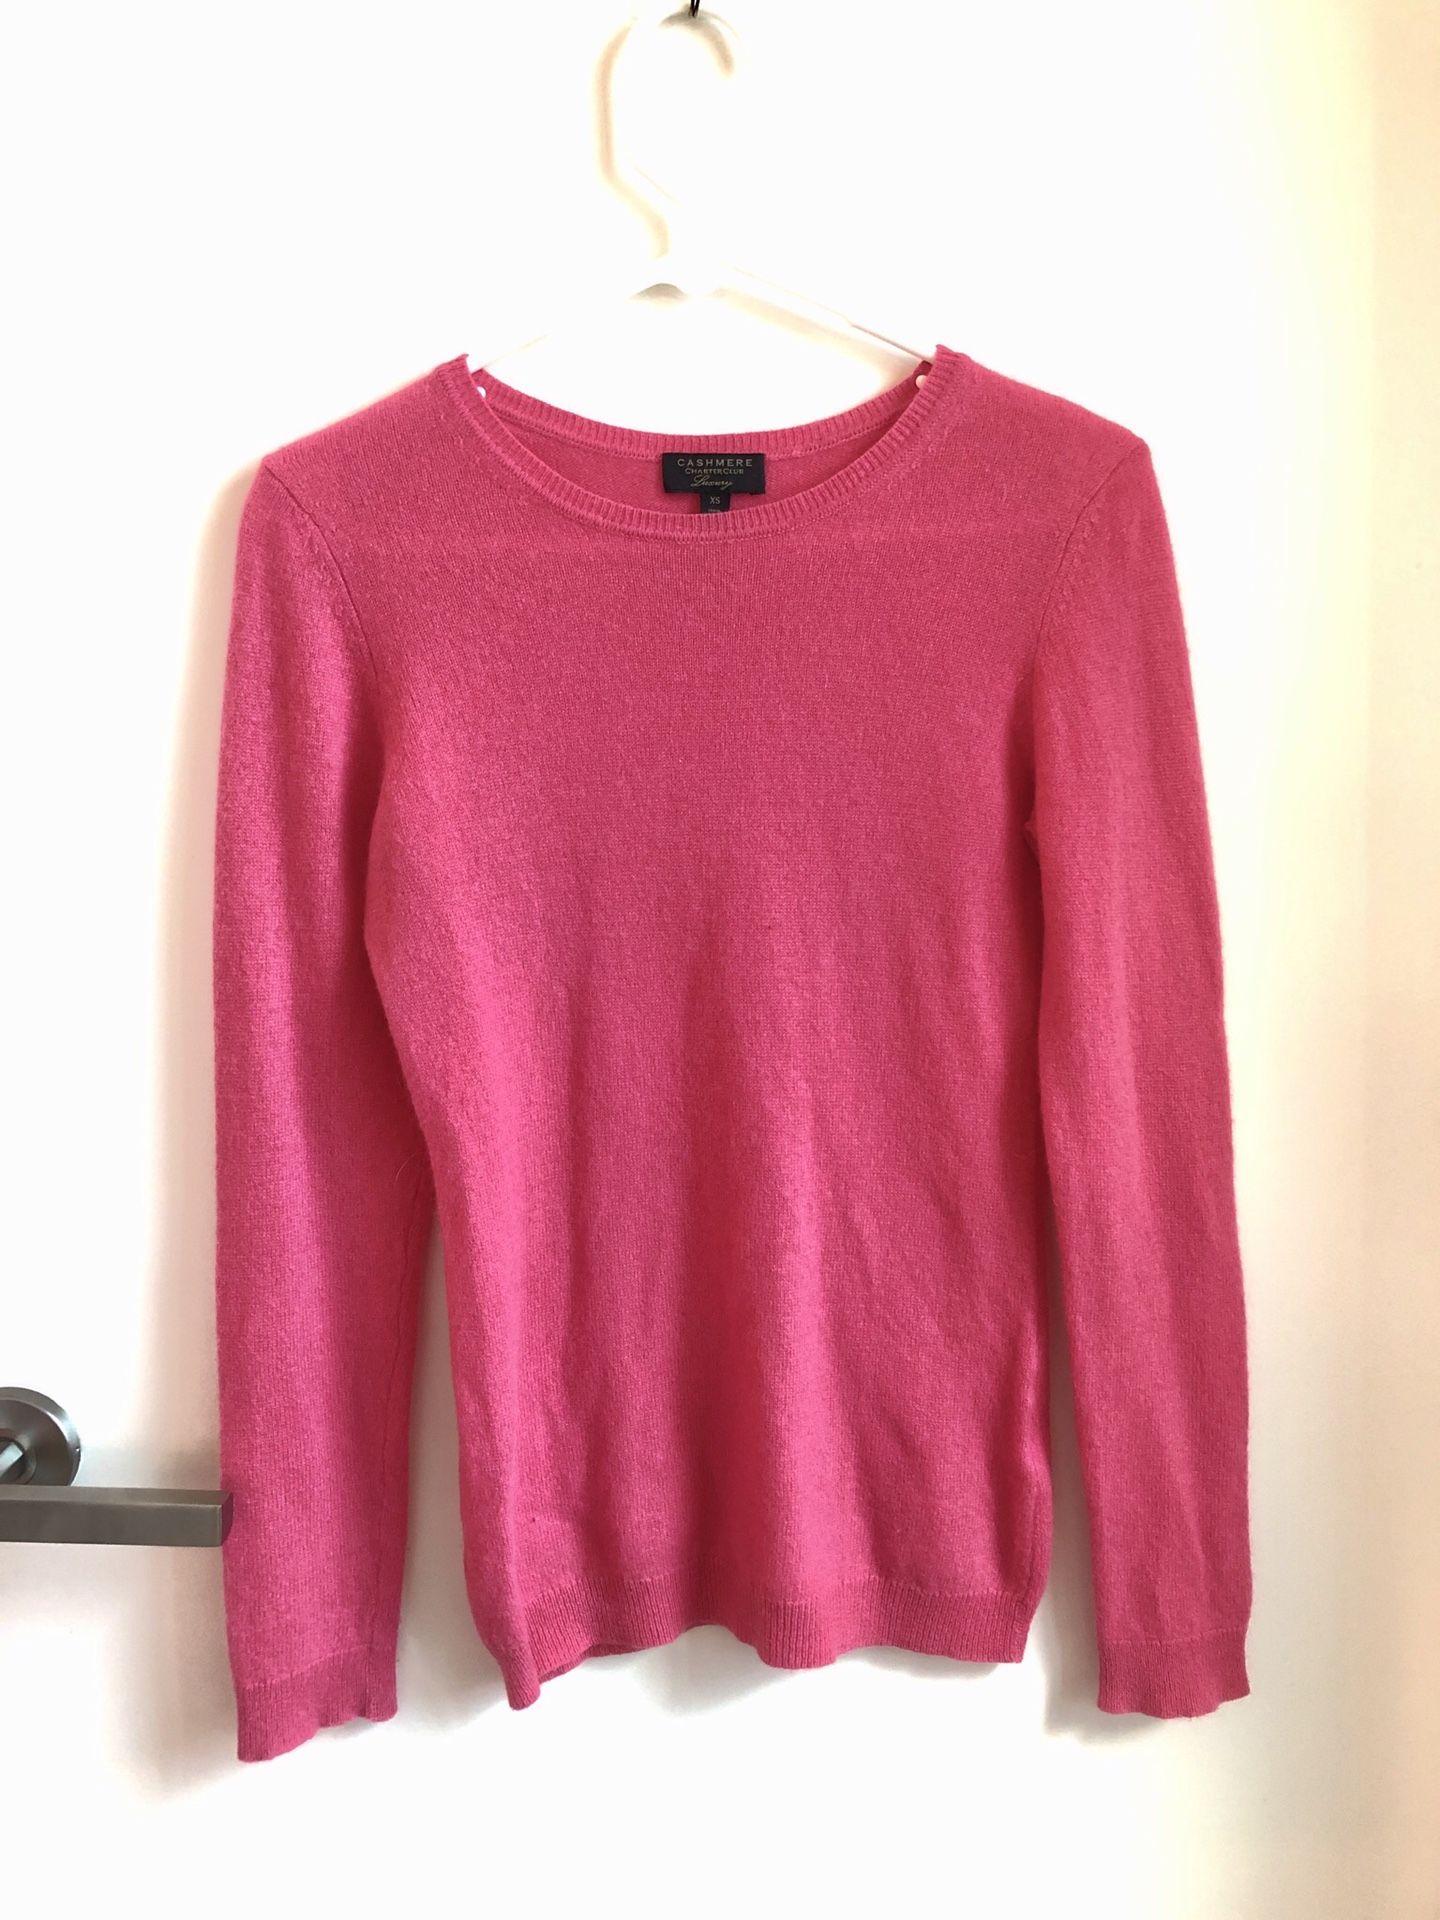 100% cashmere Sweater Size XS/S